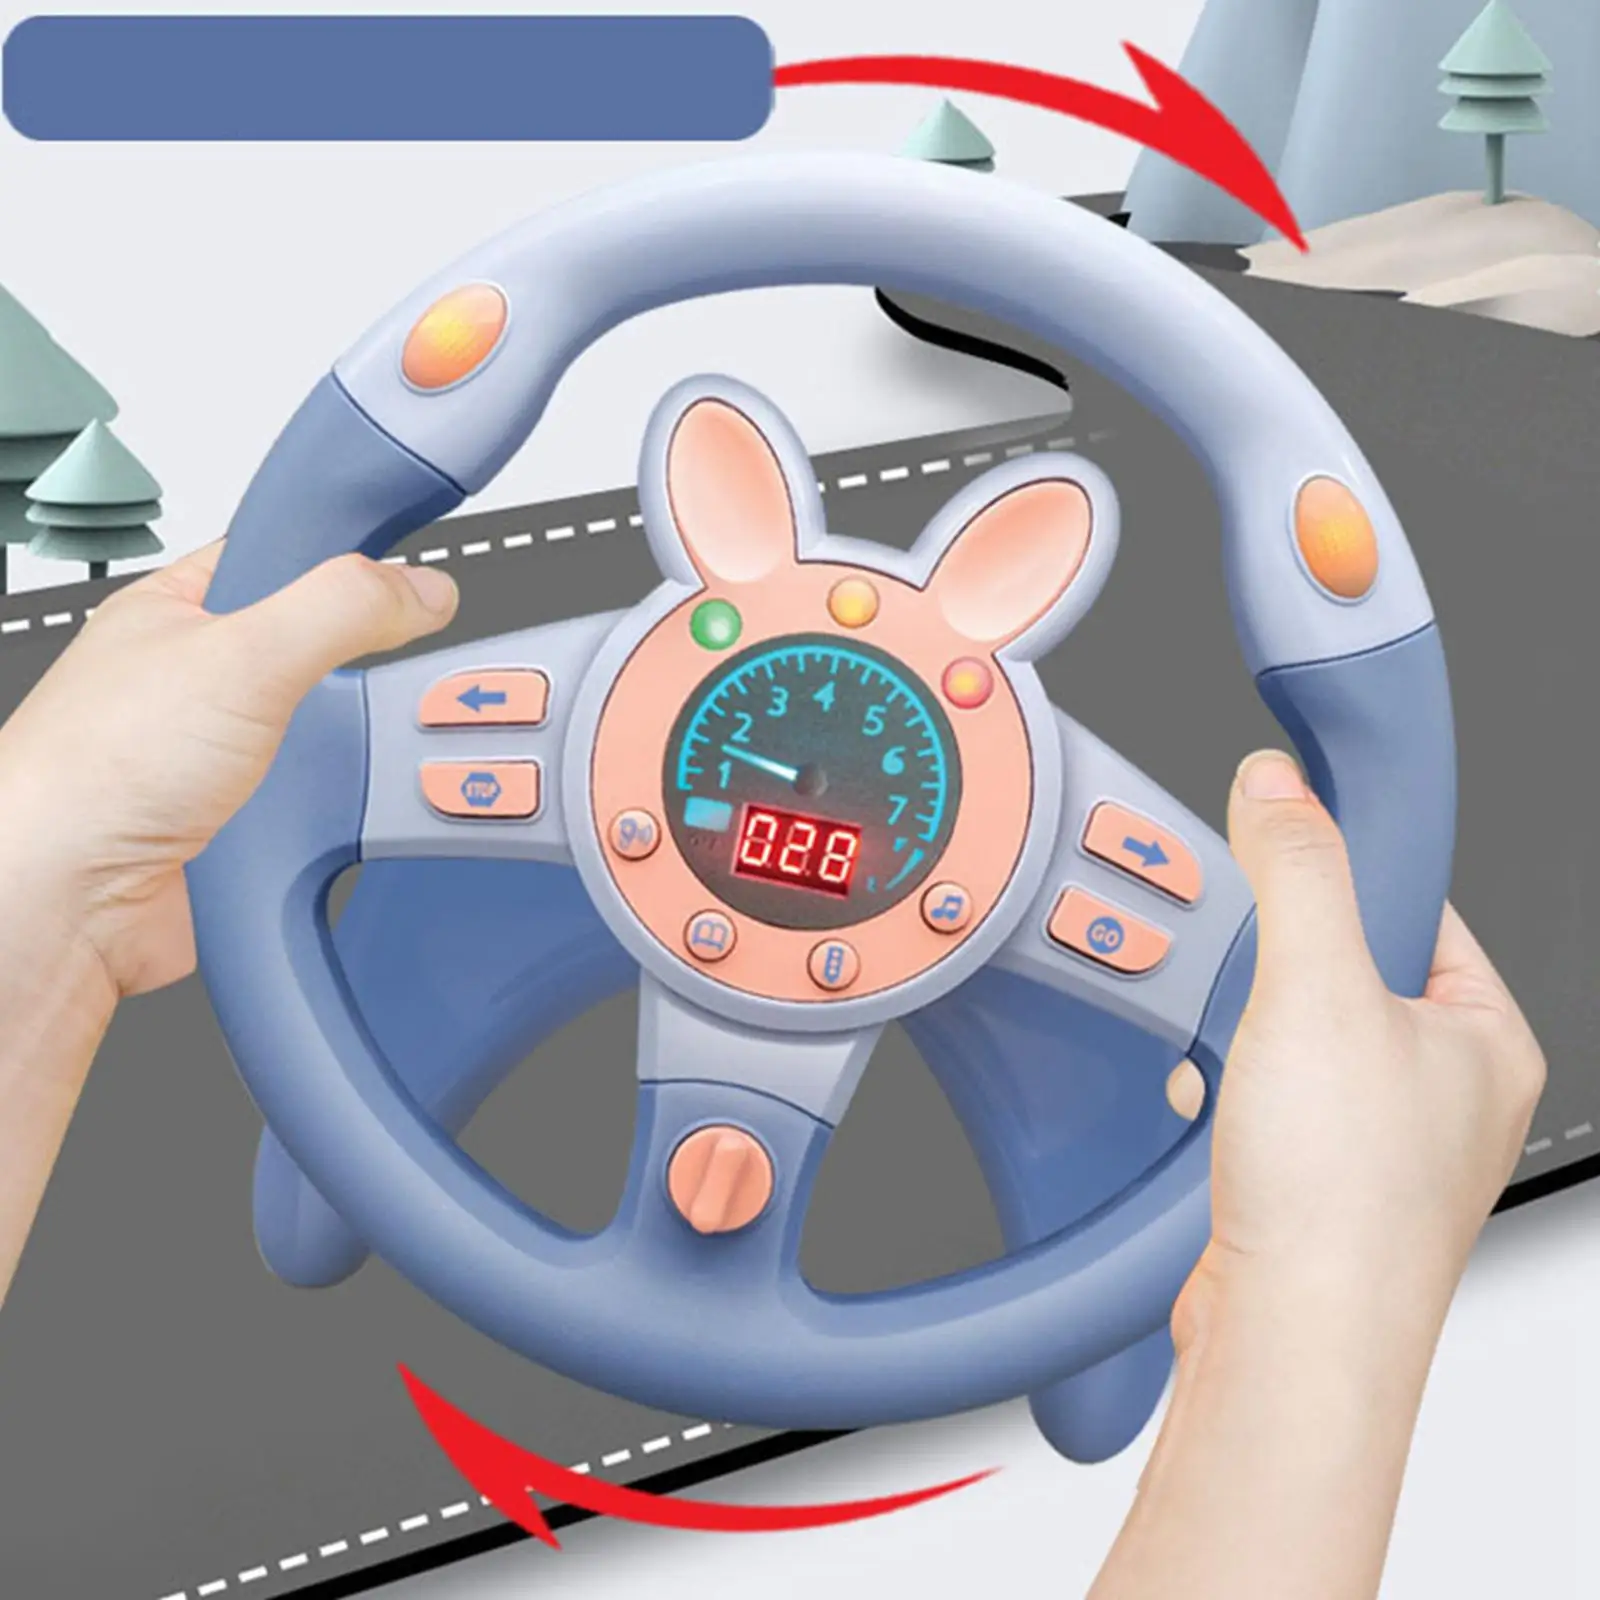 Steering Wheel Toys Traffic Knowledge Simulated Driving Interactive Driving W/Music and Light Funny Small Steering Wheel Toy